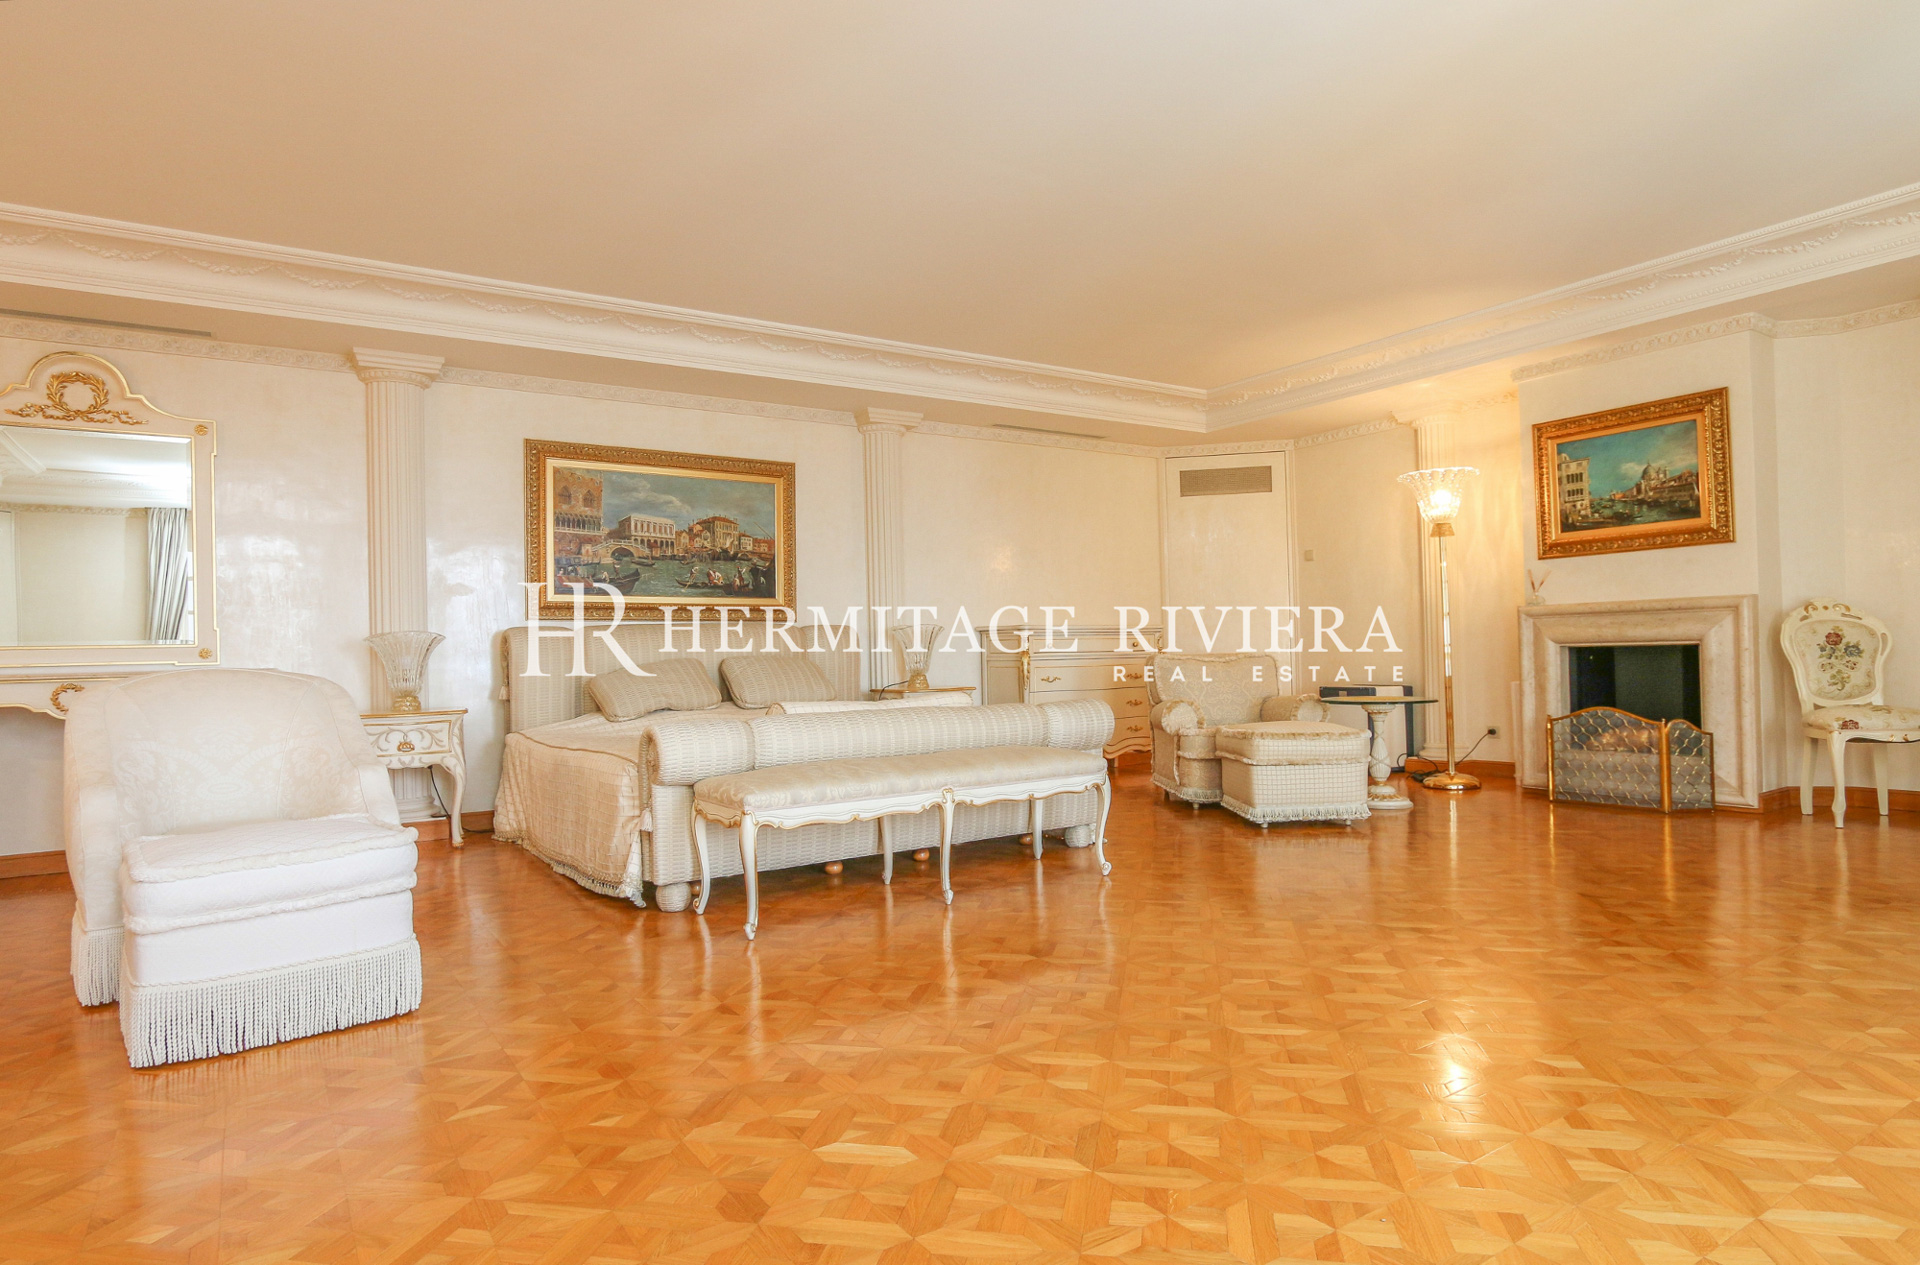 Property close Monaco with panoramic view (image 14)